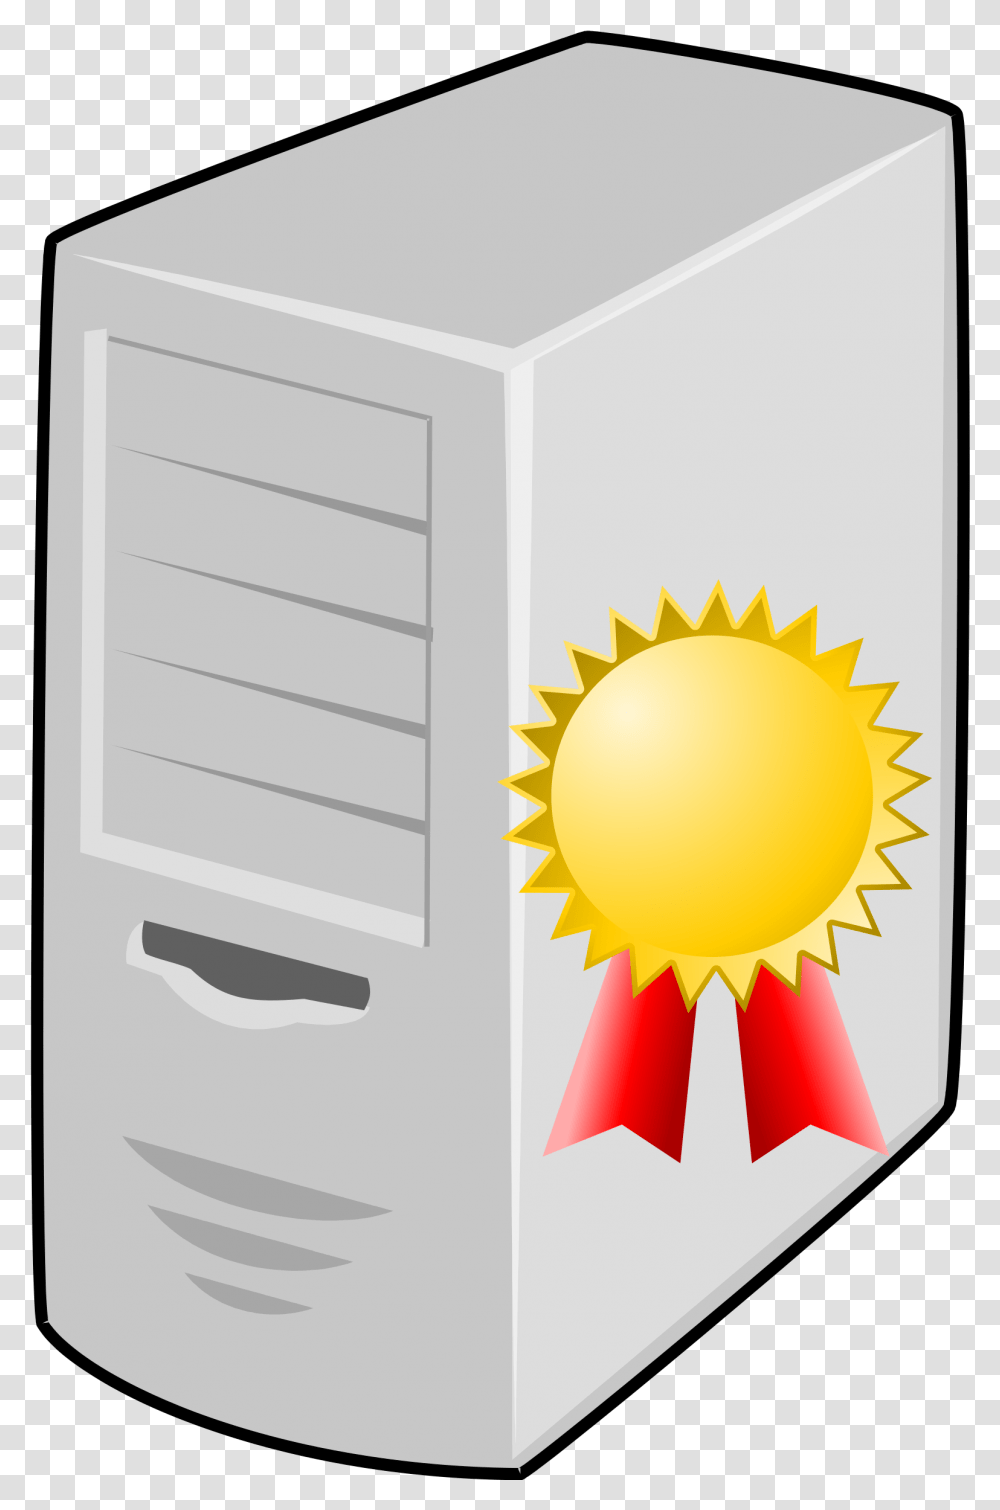 Computer Icons Computer Servers Linux Database Icon Certificate Award Clip Art, Electronics, Hardware, Gold, Mailbox Transparent Png